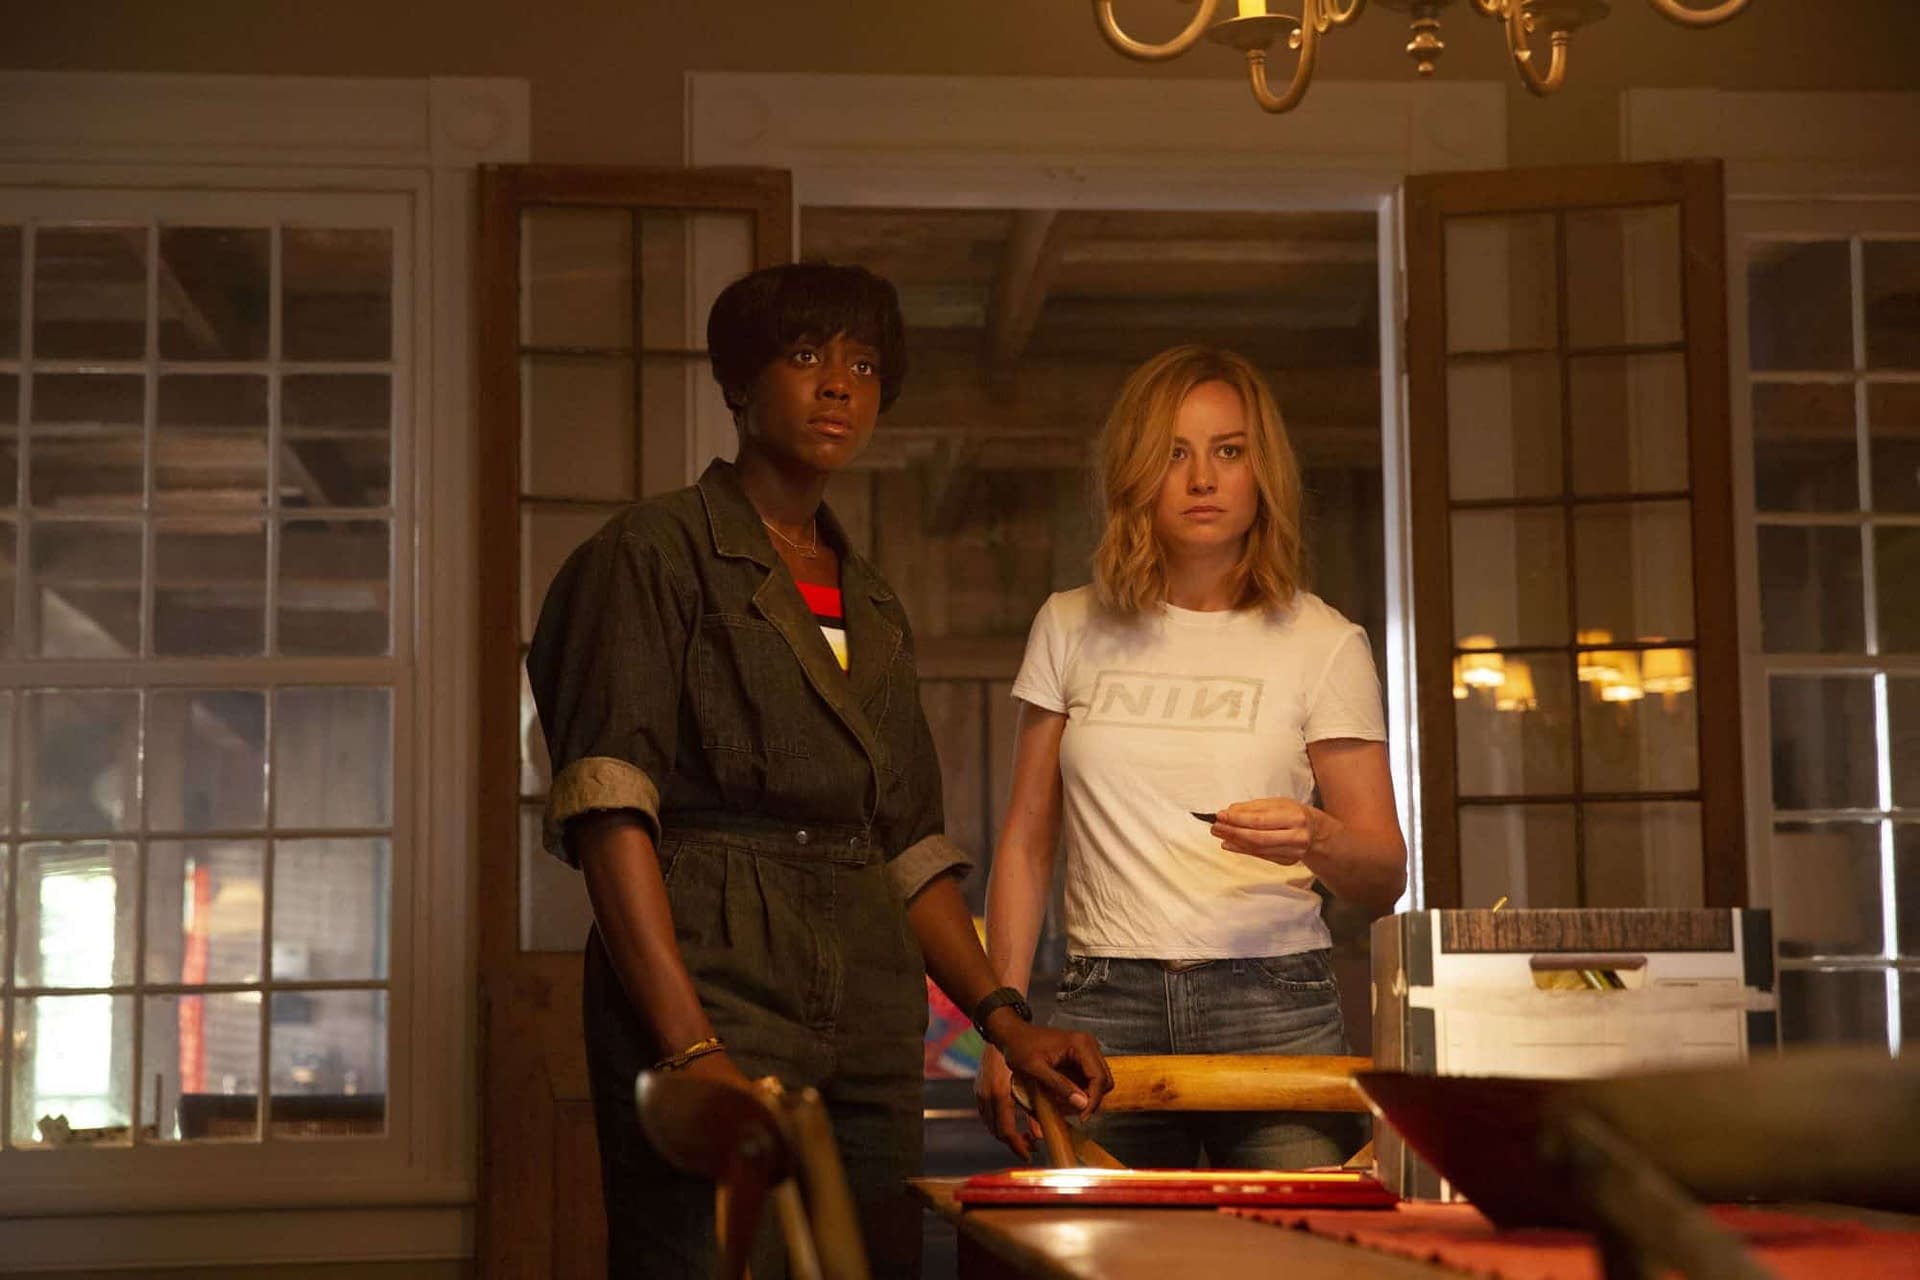 Captain Marvel Stars Brie Larson and Lashana Lynch on What Their Characters Love About Each Other